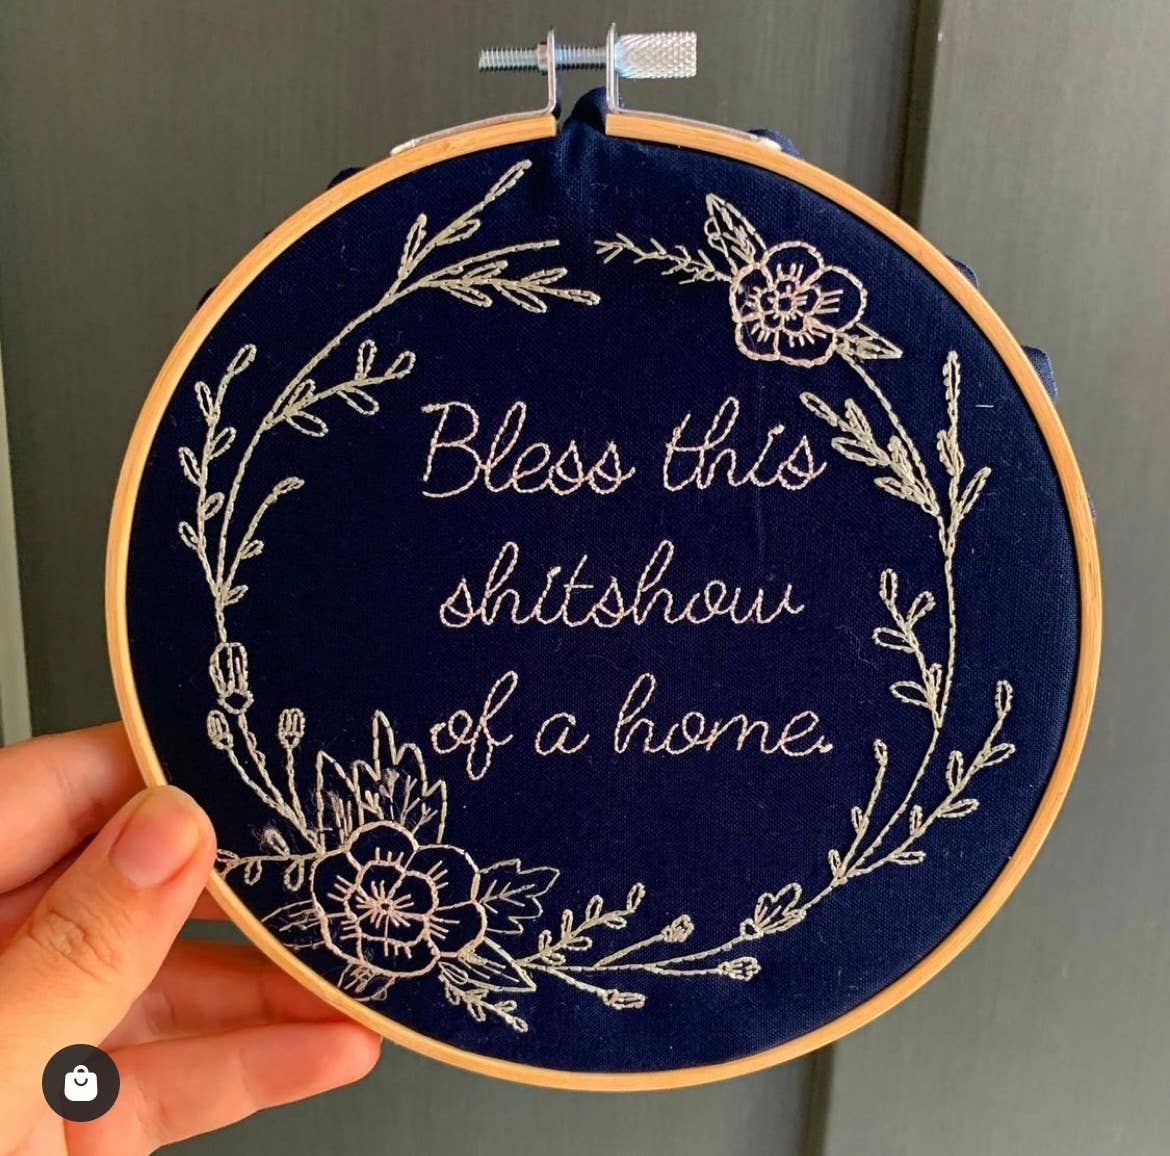 Buffalovely - Bless This Shitshow of a Home Embroidery Hoop